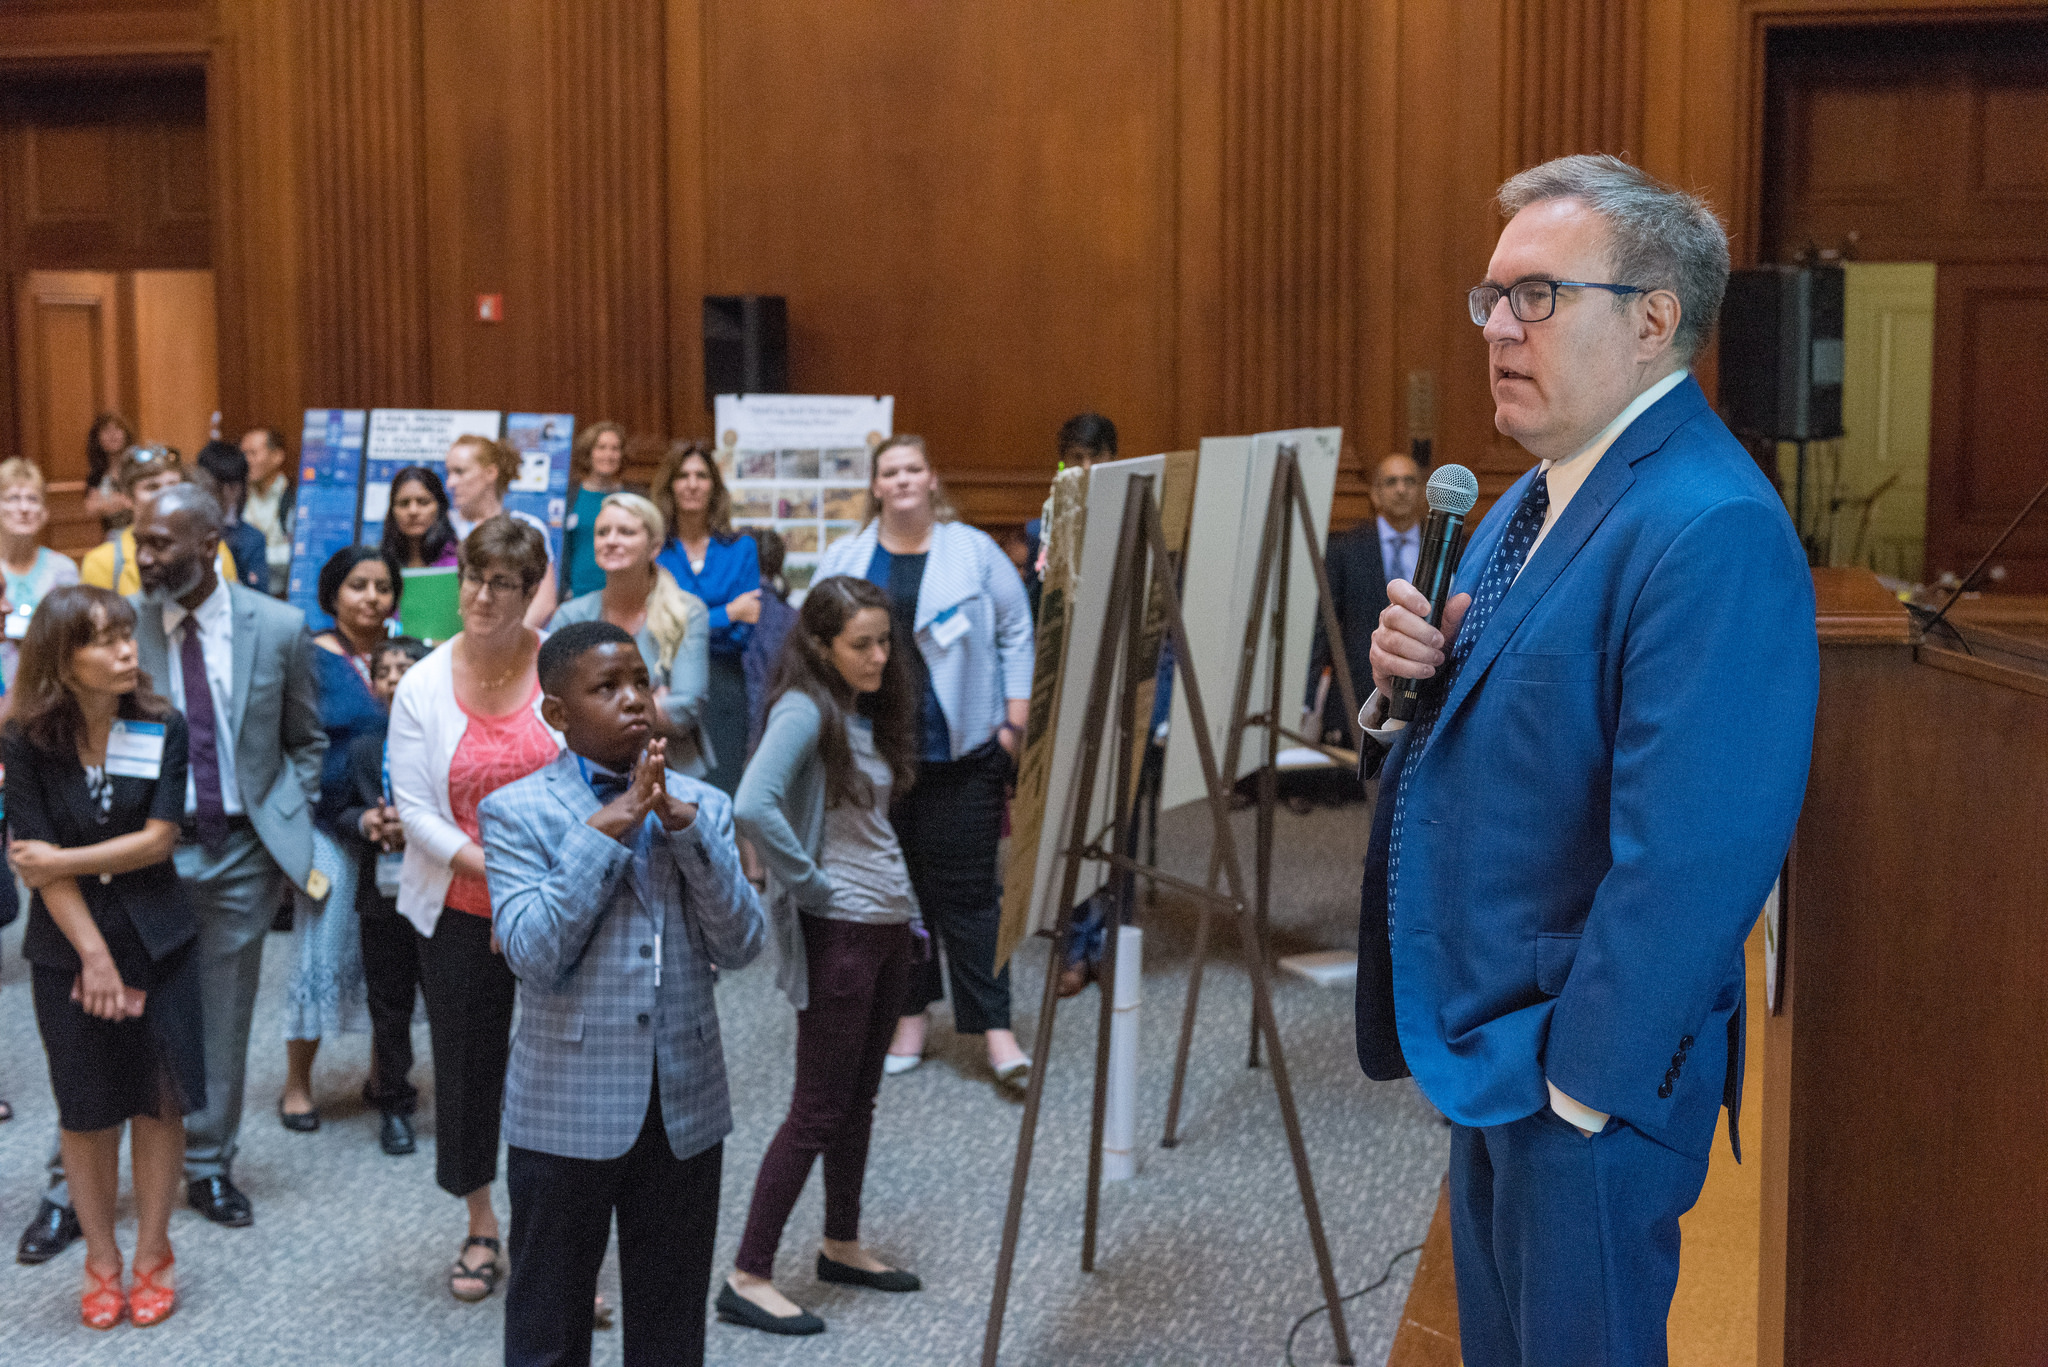 Acting Administrator Andrew Wheeler speaking to students and teachers at a poster session